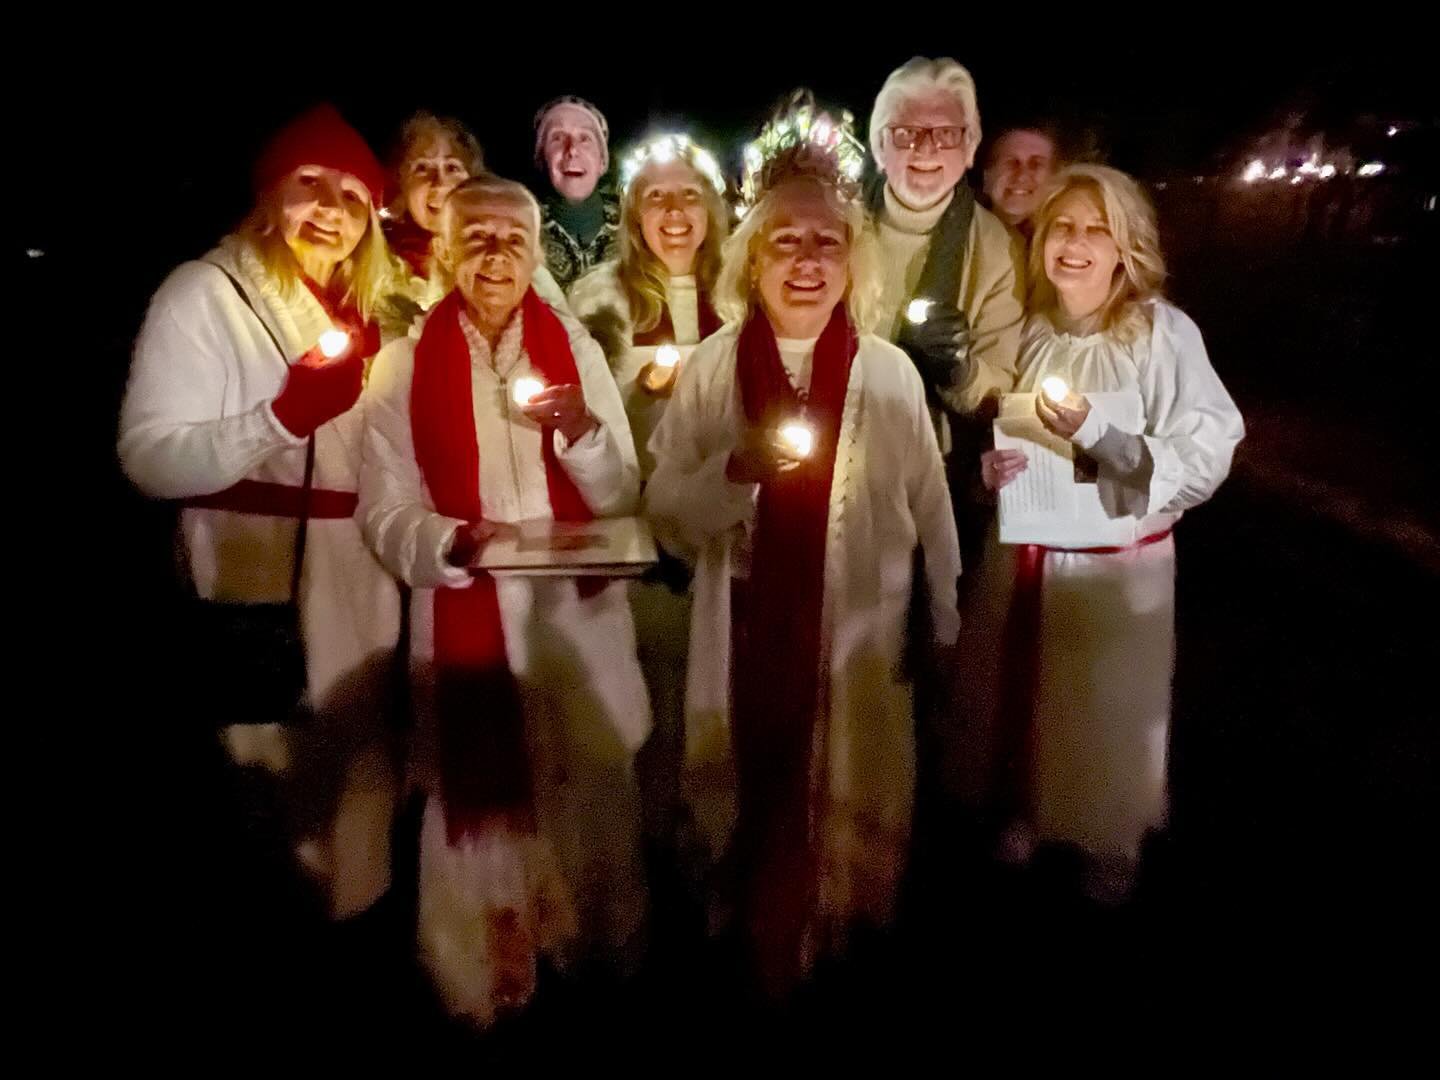 Celebrating Santa Lucia Festival of Lights in Big Sur, California at the Henry Miller Memorial Library at the base of the Santa Louisa Mountains. Singing with friends, celebrating joy &amp; community &amp; the light we each carry. ✨🌲🌲✨🕯️🕯️&hearts